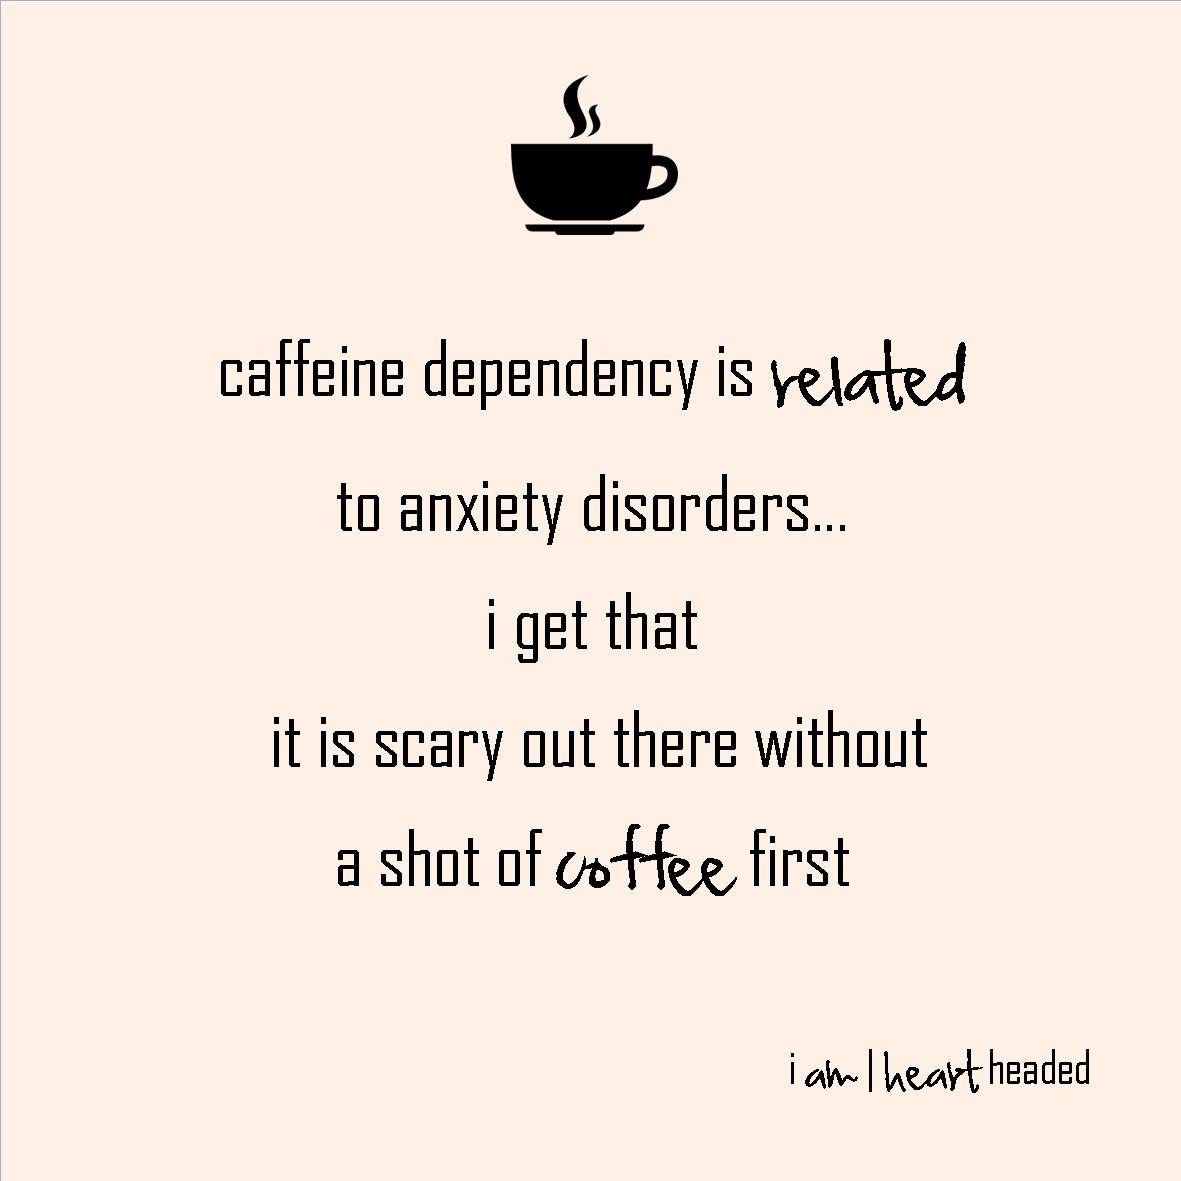 full-size featured image of quote 'coffee anxiety' in category 'witty' at i am | heart headed